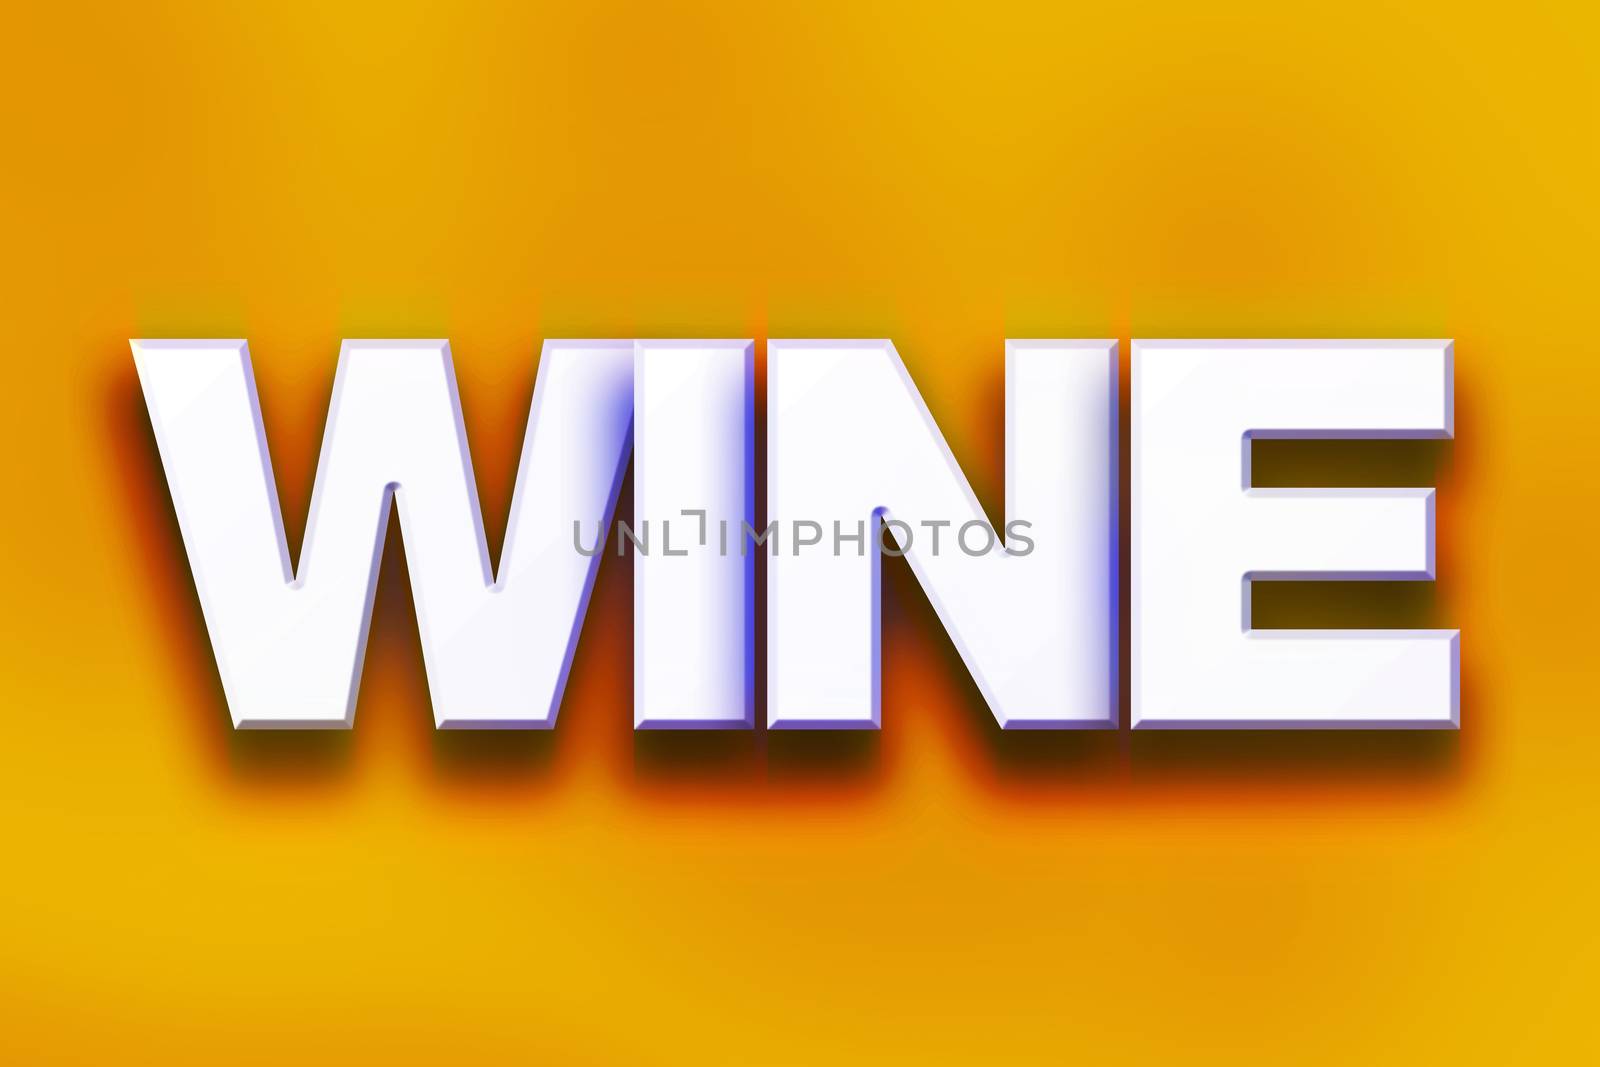 The word "Wine" written in white 3D letters on a colorful background concept and theme.